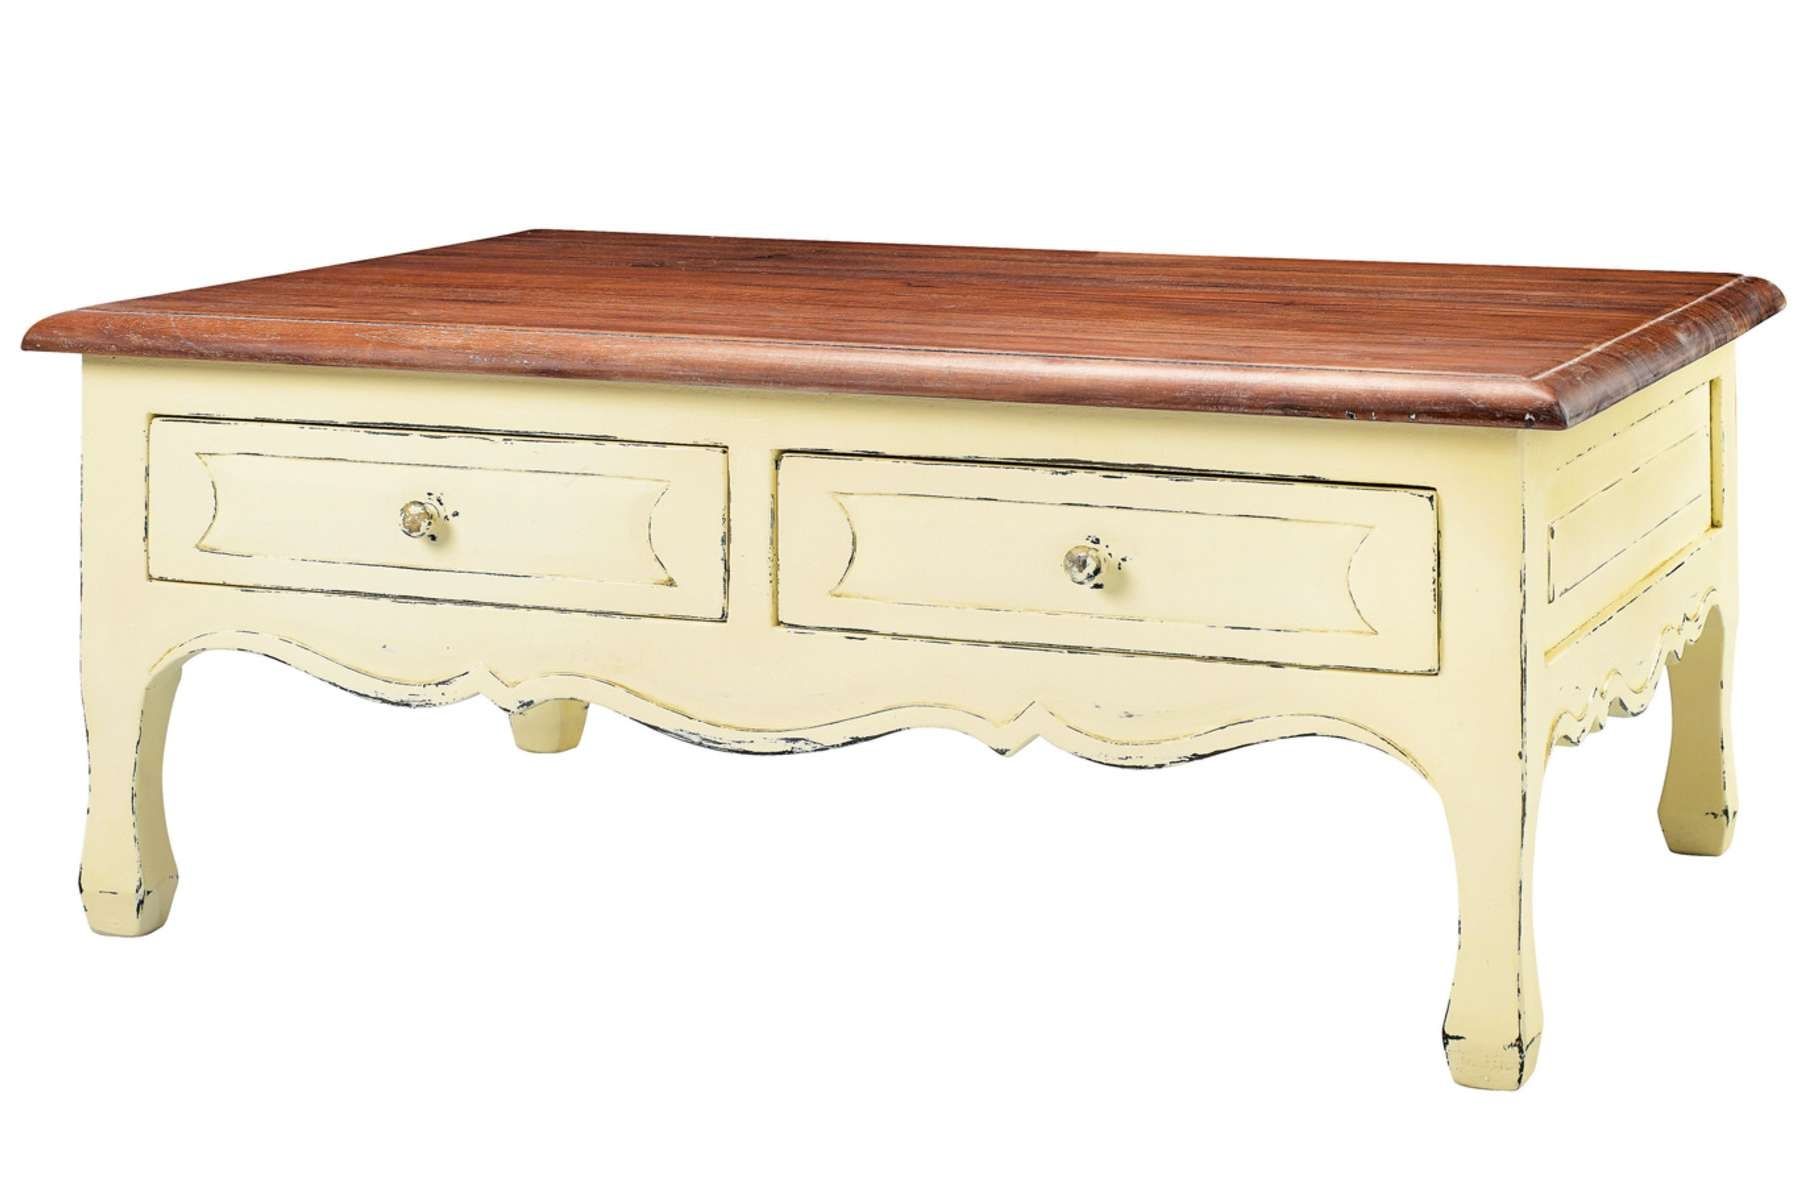 Trendy Cream Coffee Tables With Drawers Regarding Made To Order Coffee Table (View 12 of 20)